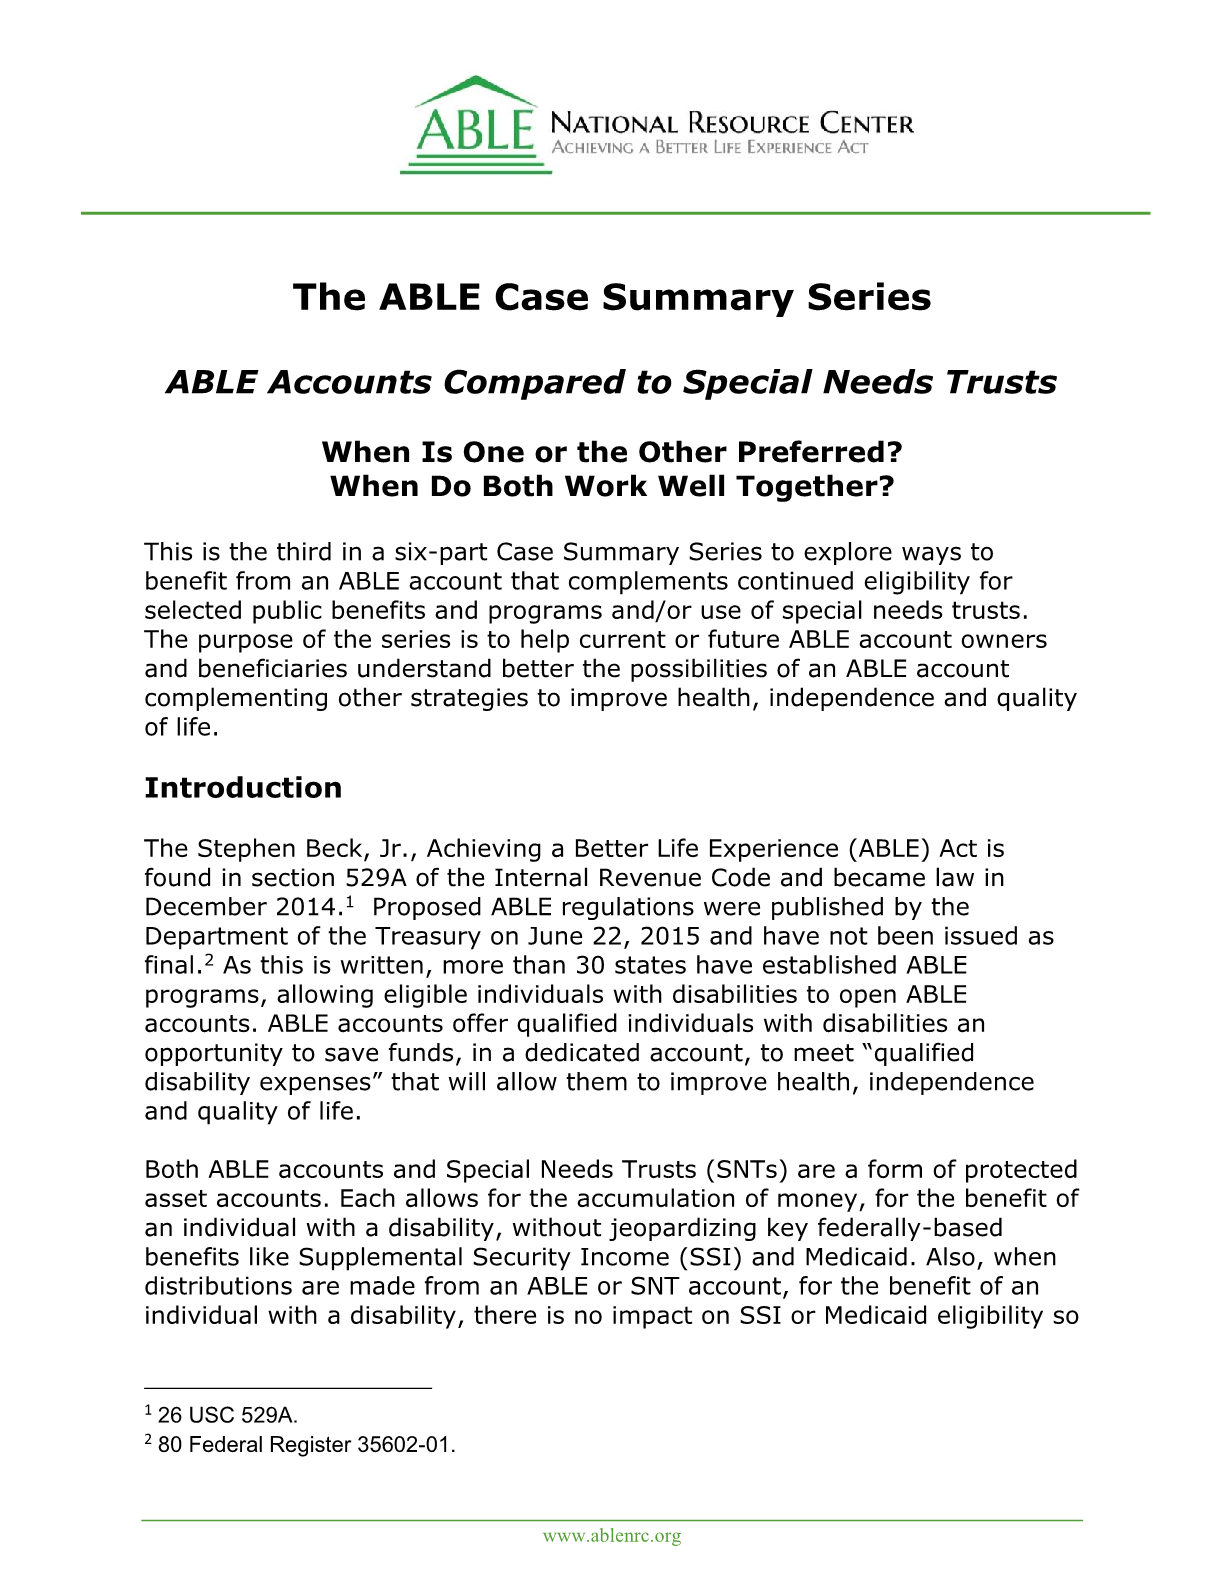 ABLE Accounts Compared to Special Need Trusts